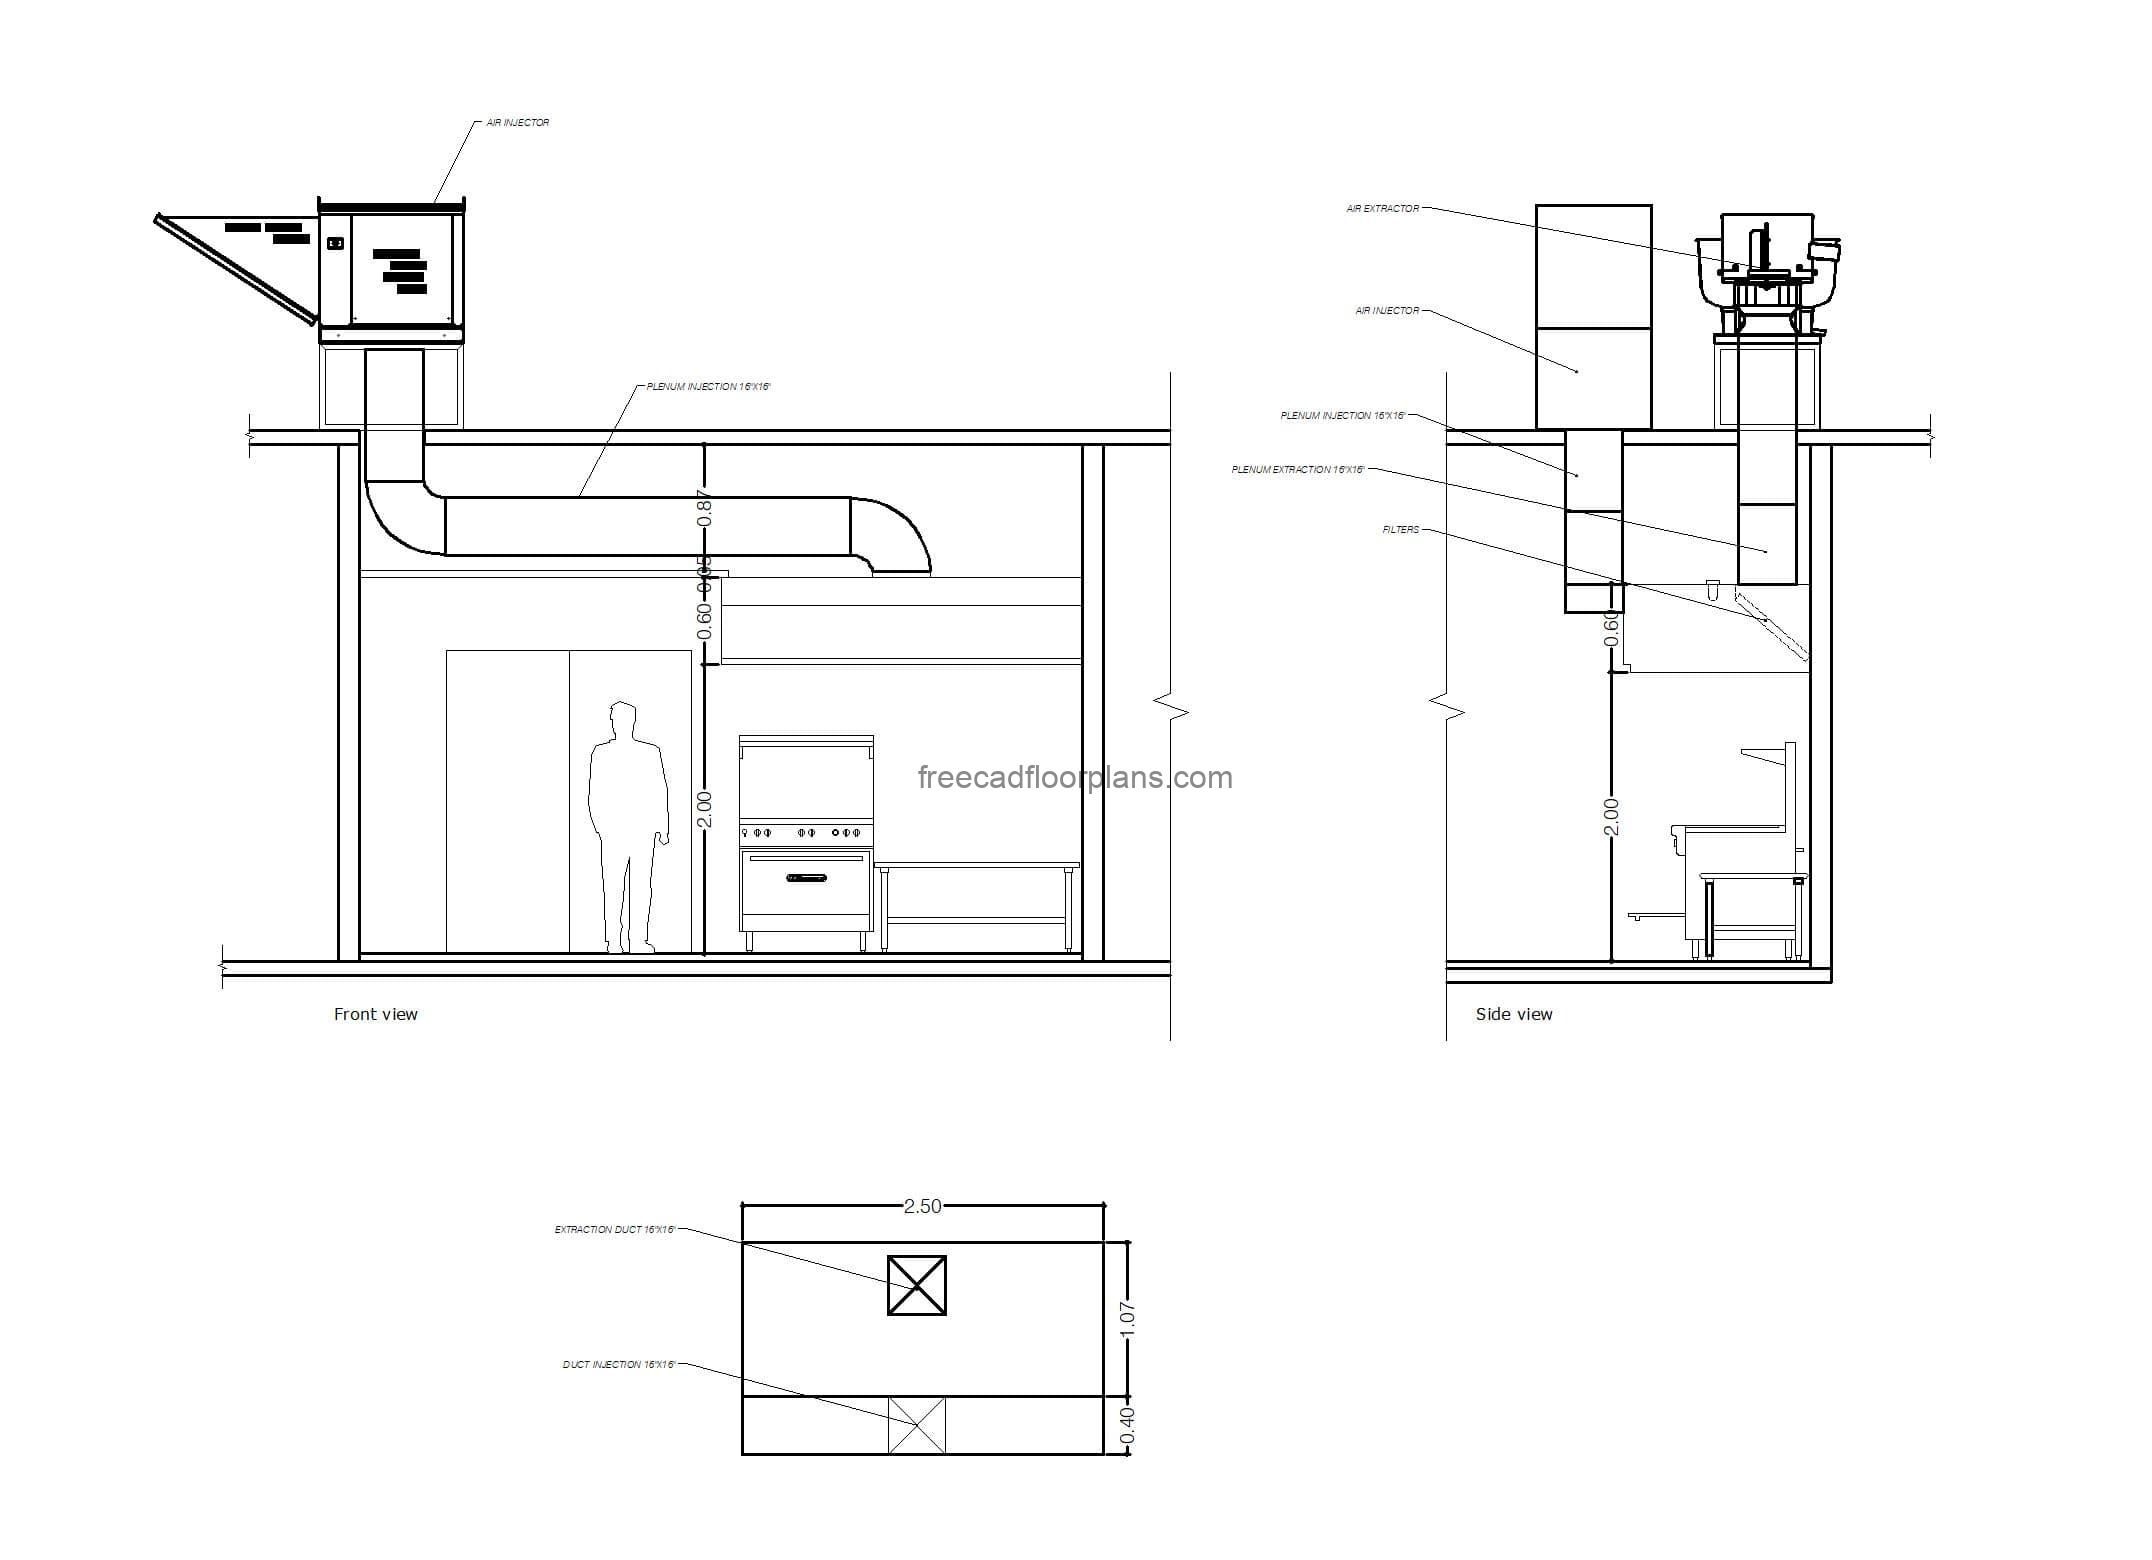 autocad drawing of a range with hood, plan and elevation 2d views, dwg file for free download